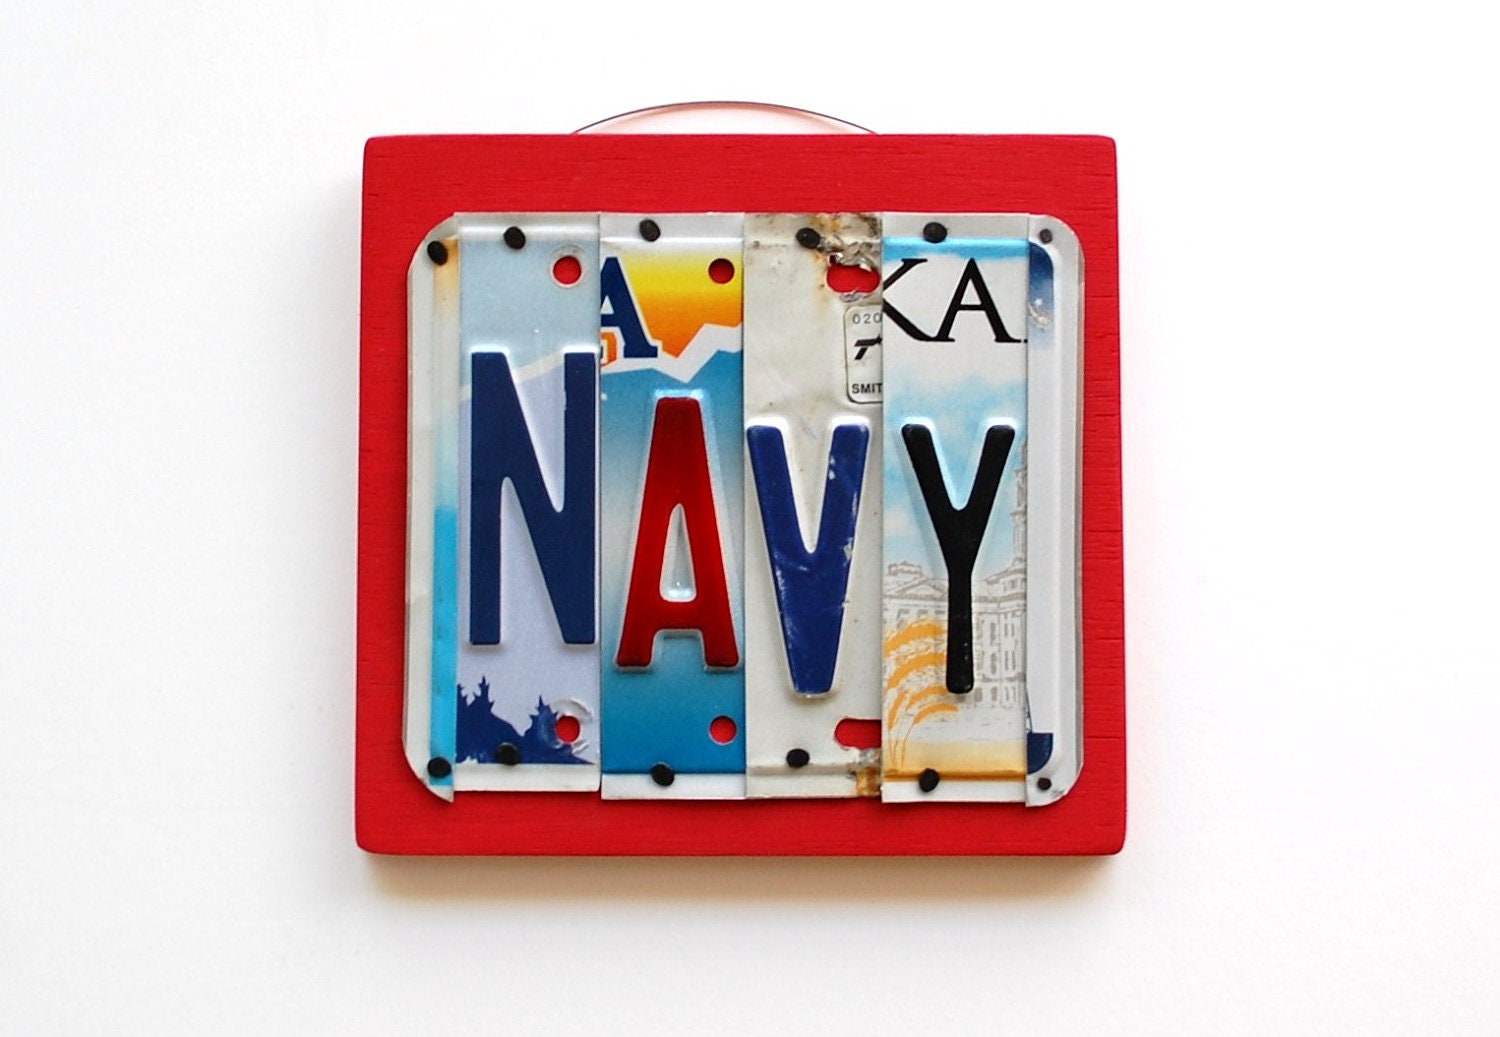 NAVY, License Plate Art, Custom Home Decor, Wall Hanging, Sailor, Unites States Navy, Sea bee, sea men, father's day gift, retirement - UniquePl8z